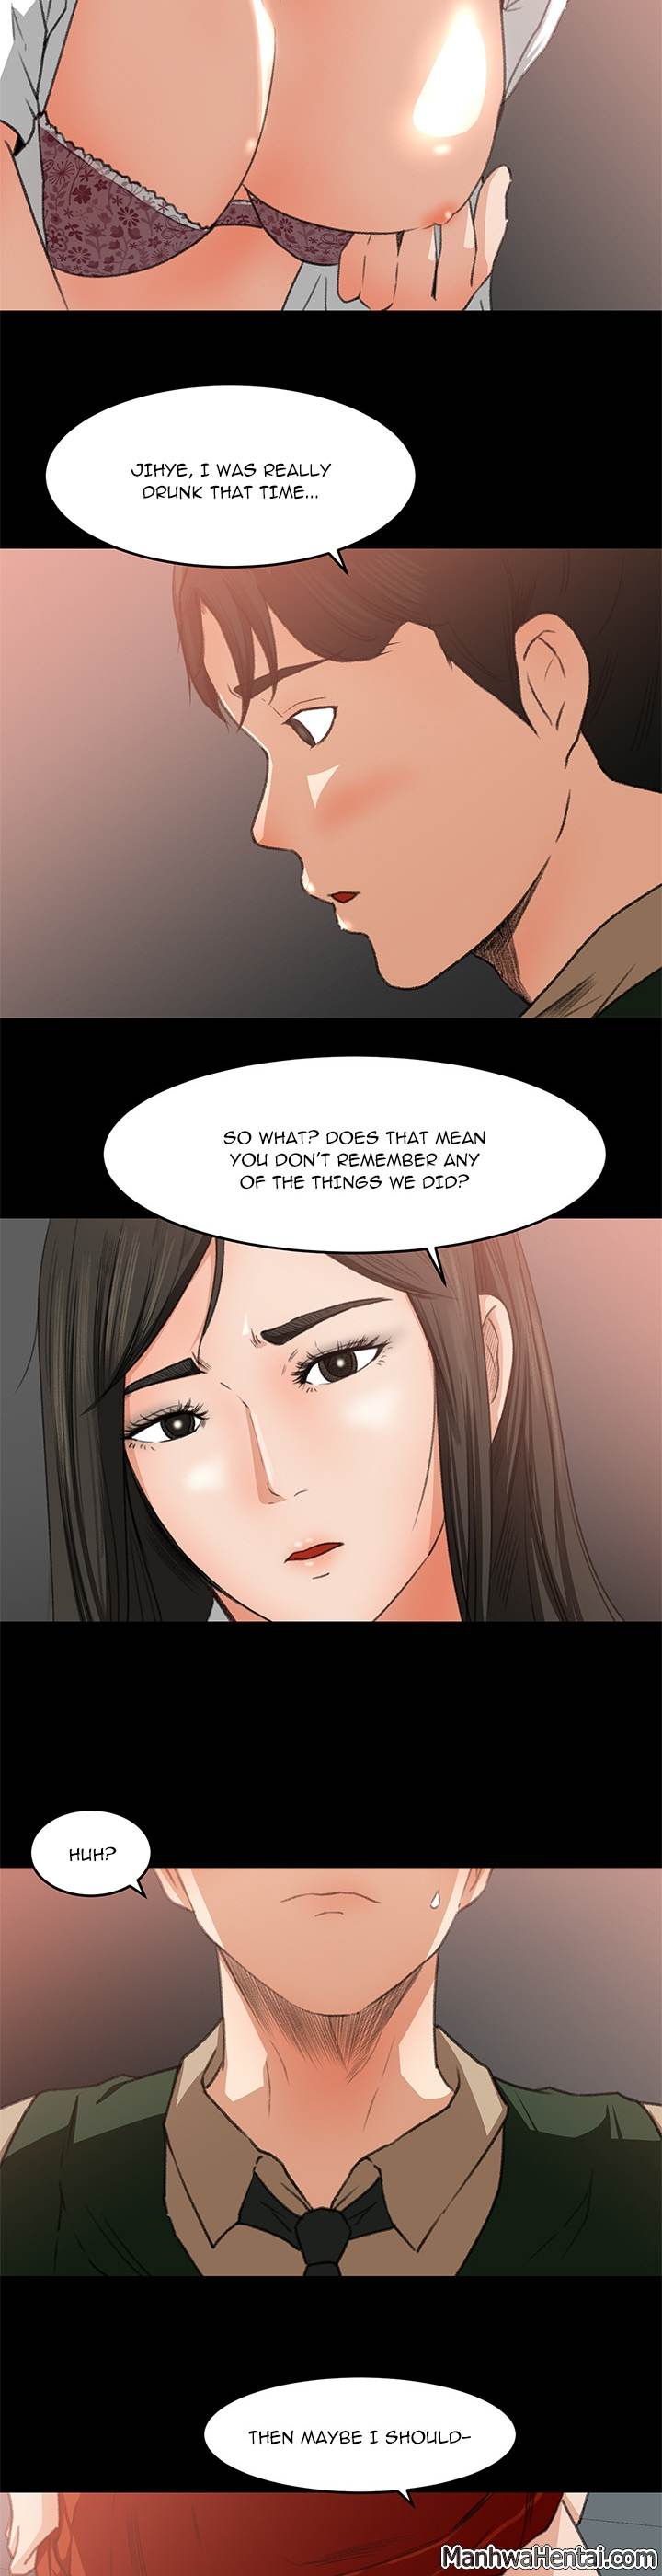 Inside the Uniform - Chapter 7 Page 10